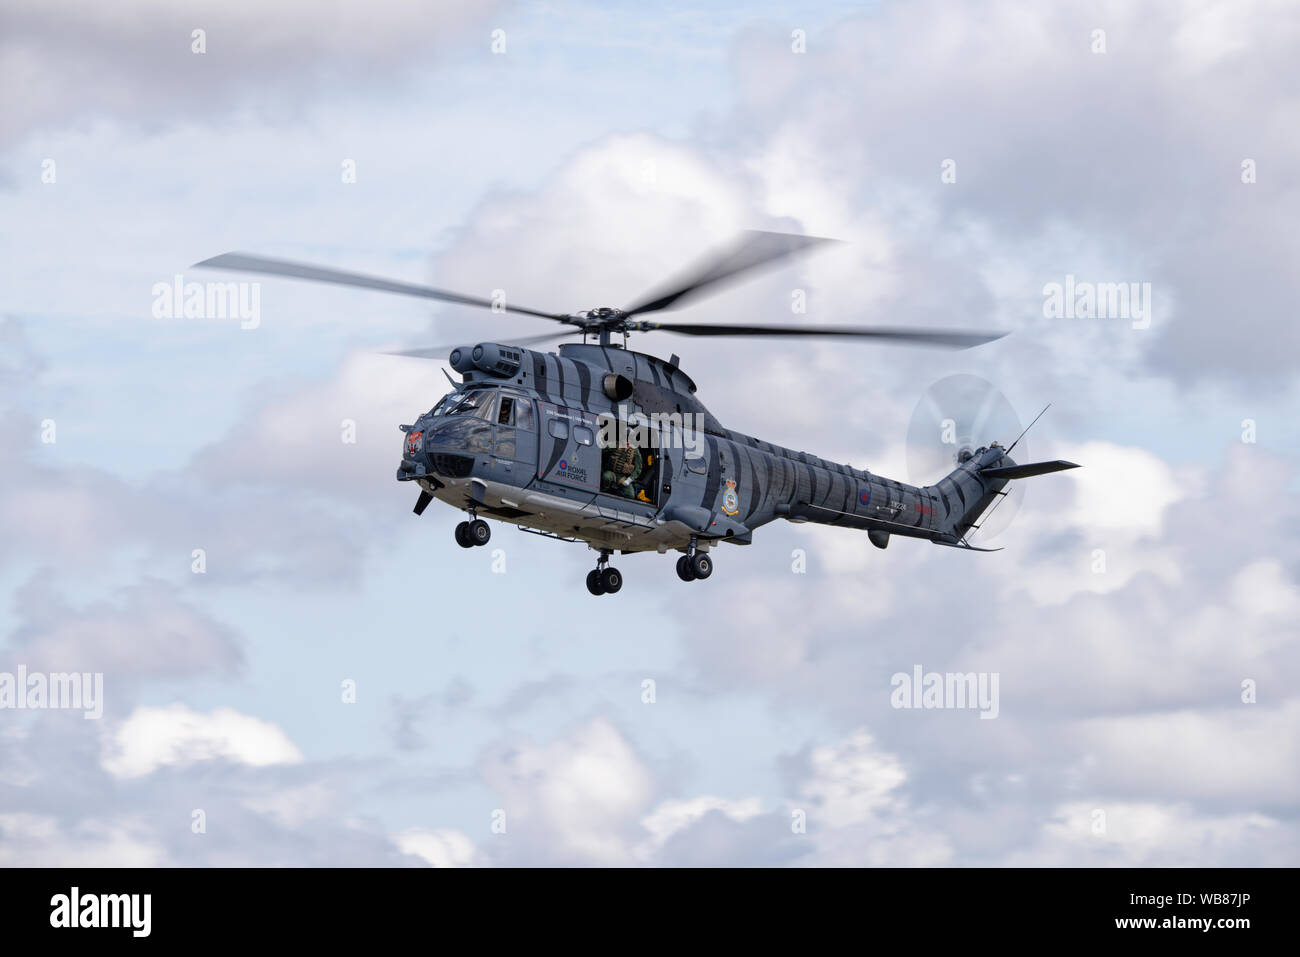 British Royal Air Force Aerospatiale Puma Helicopter arrives at RAF Fairford to participate in the Royal International Air Tattoo Stock Photo